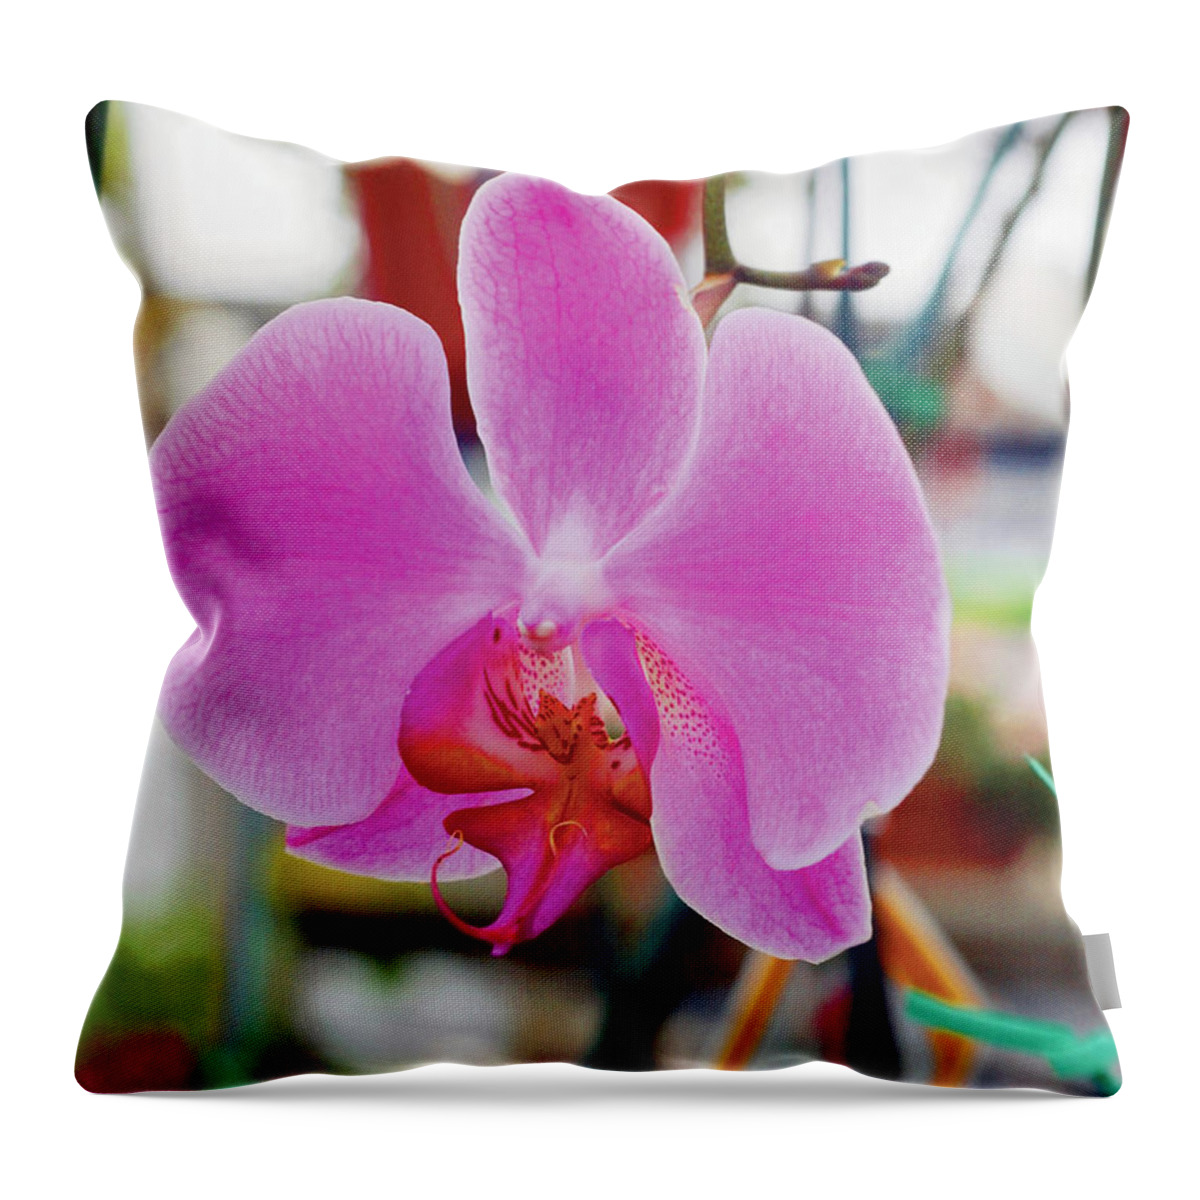 Purple Throw Pillow featuring the photograph Purple Orchid In Bloom, Close-up by Medioimages/photodisc